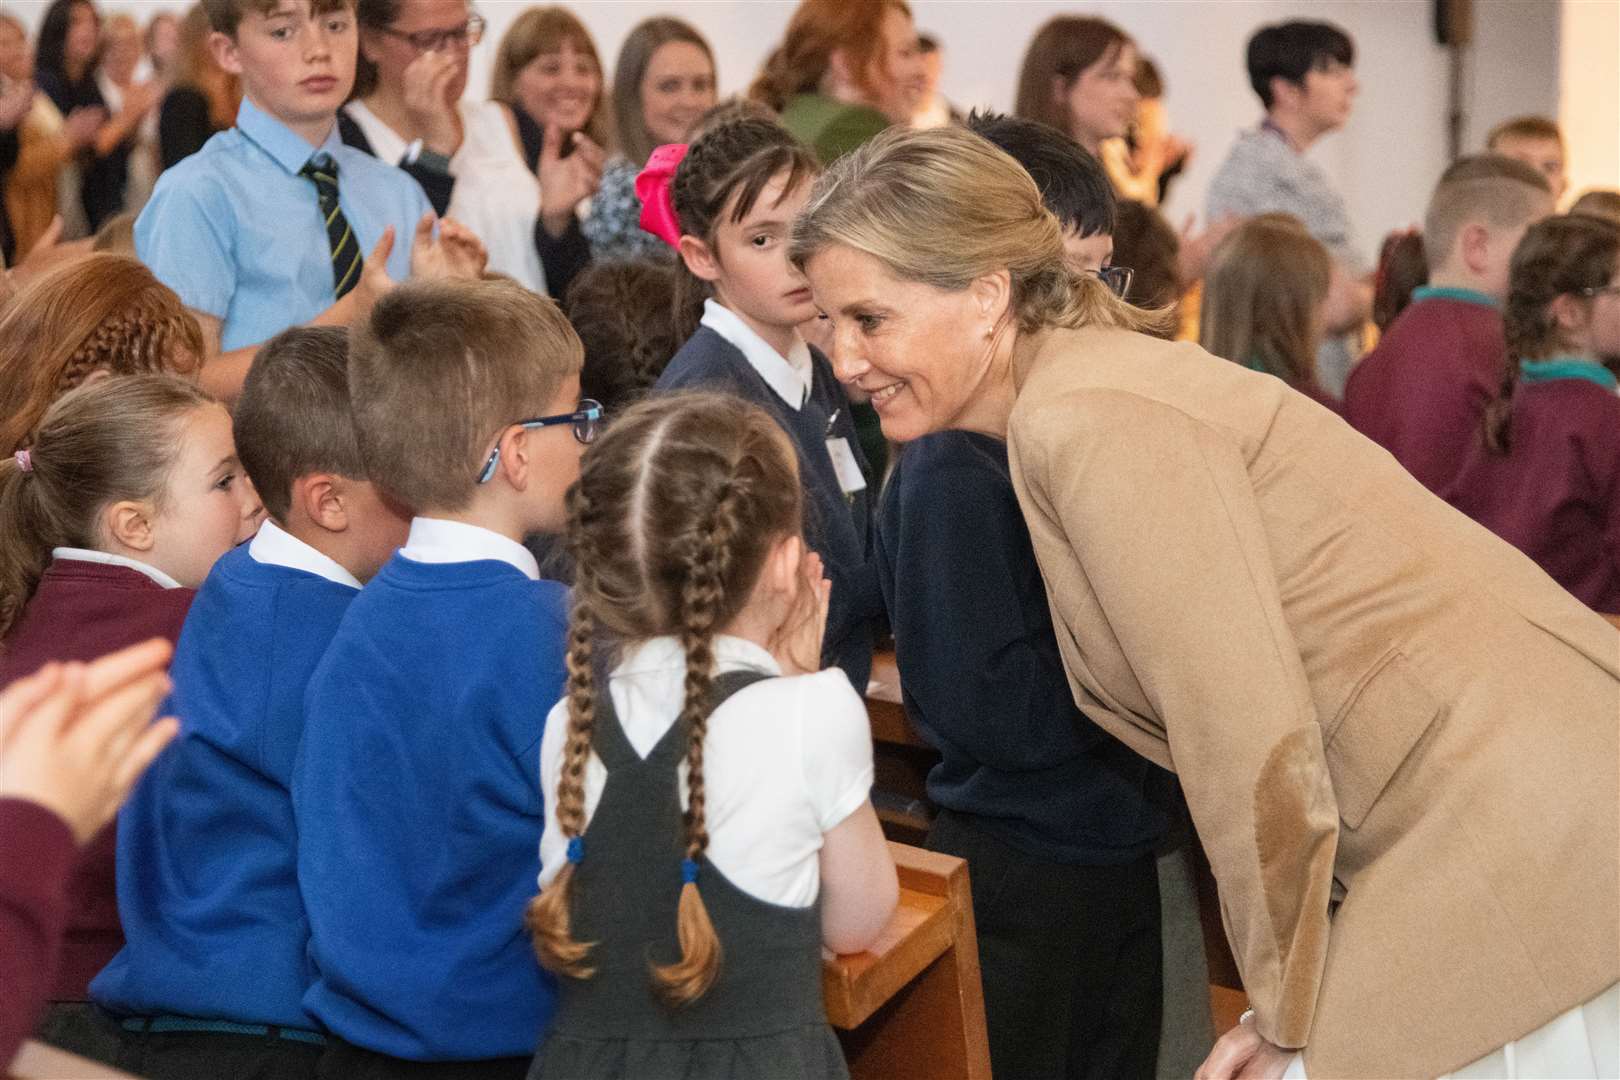 The Countess greets pupils on her way out. ..Prince Edward and Sophie, known as the Earl and Countess of Forfar when visiting Scotland, spend time at Gordonstoun School during their visit to Moray...Picture: Daniel Forsyth..